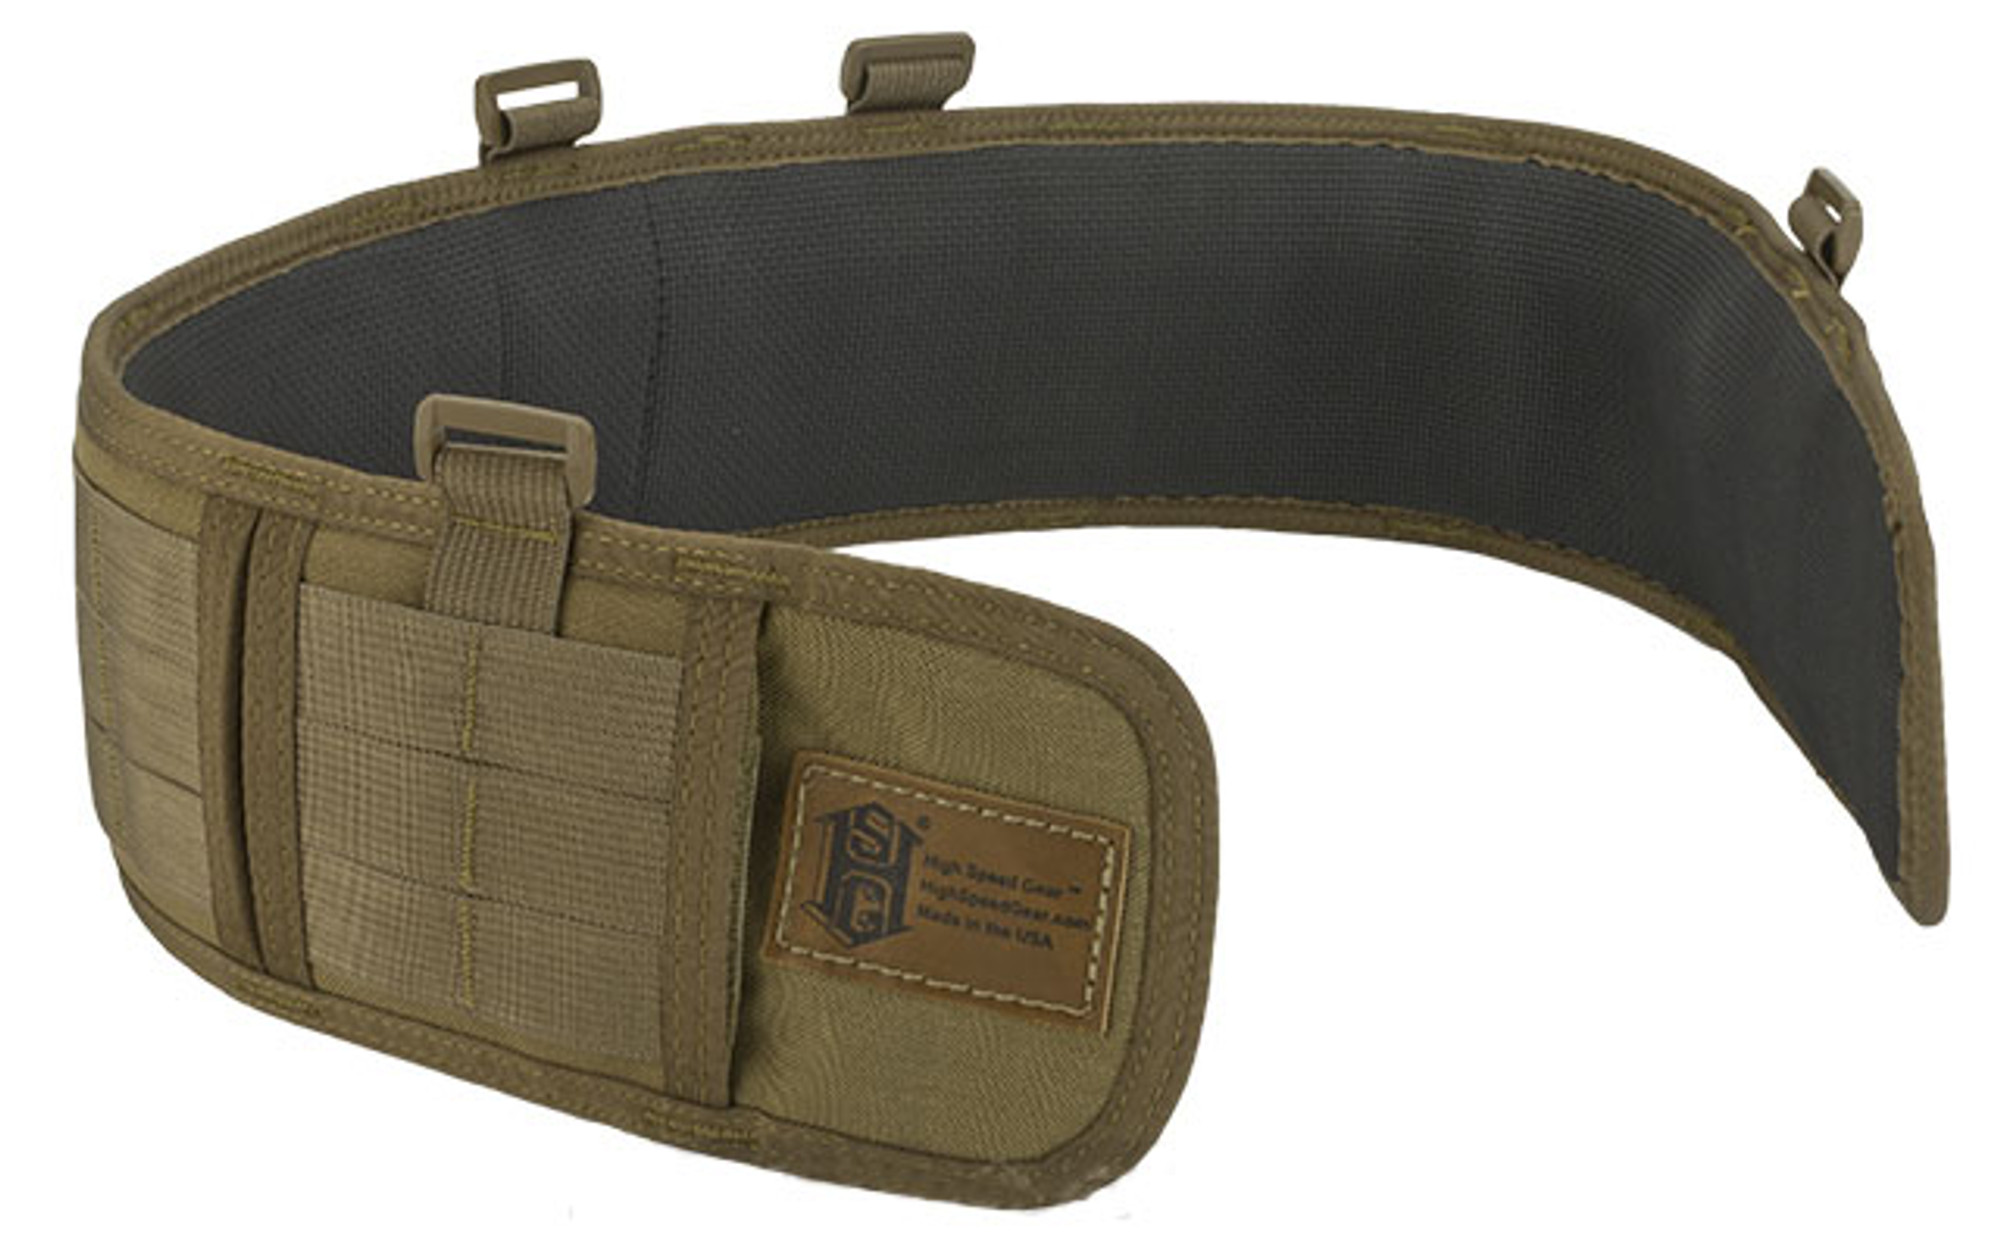 HSGI Slotted Sure-Grip Padded Duty Belt (Color: Coyote Brown / Small 30.5")